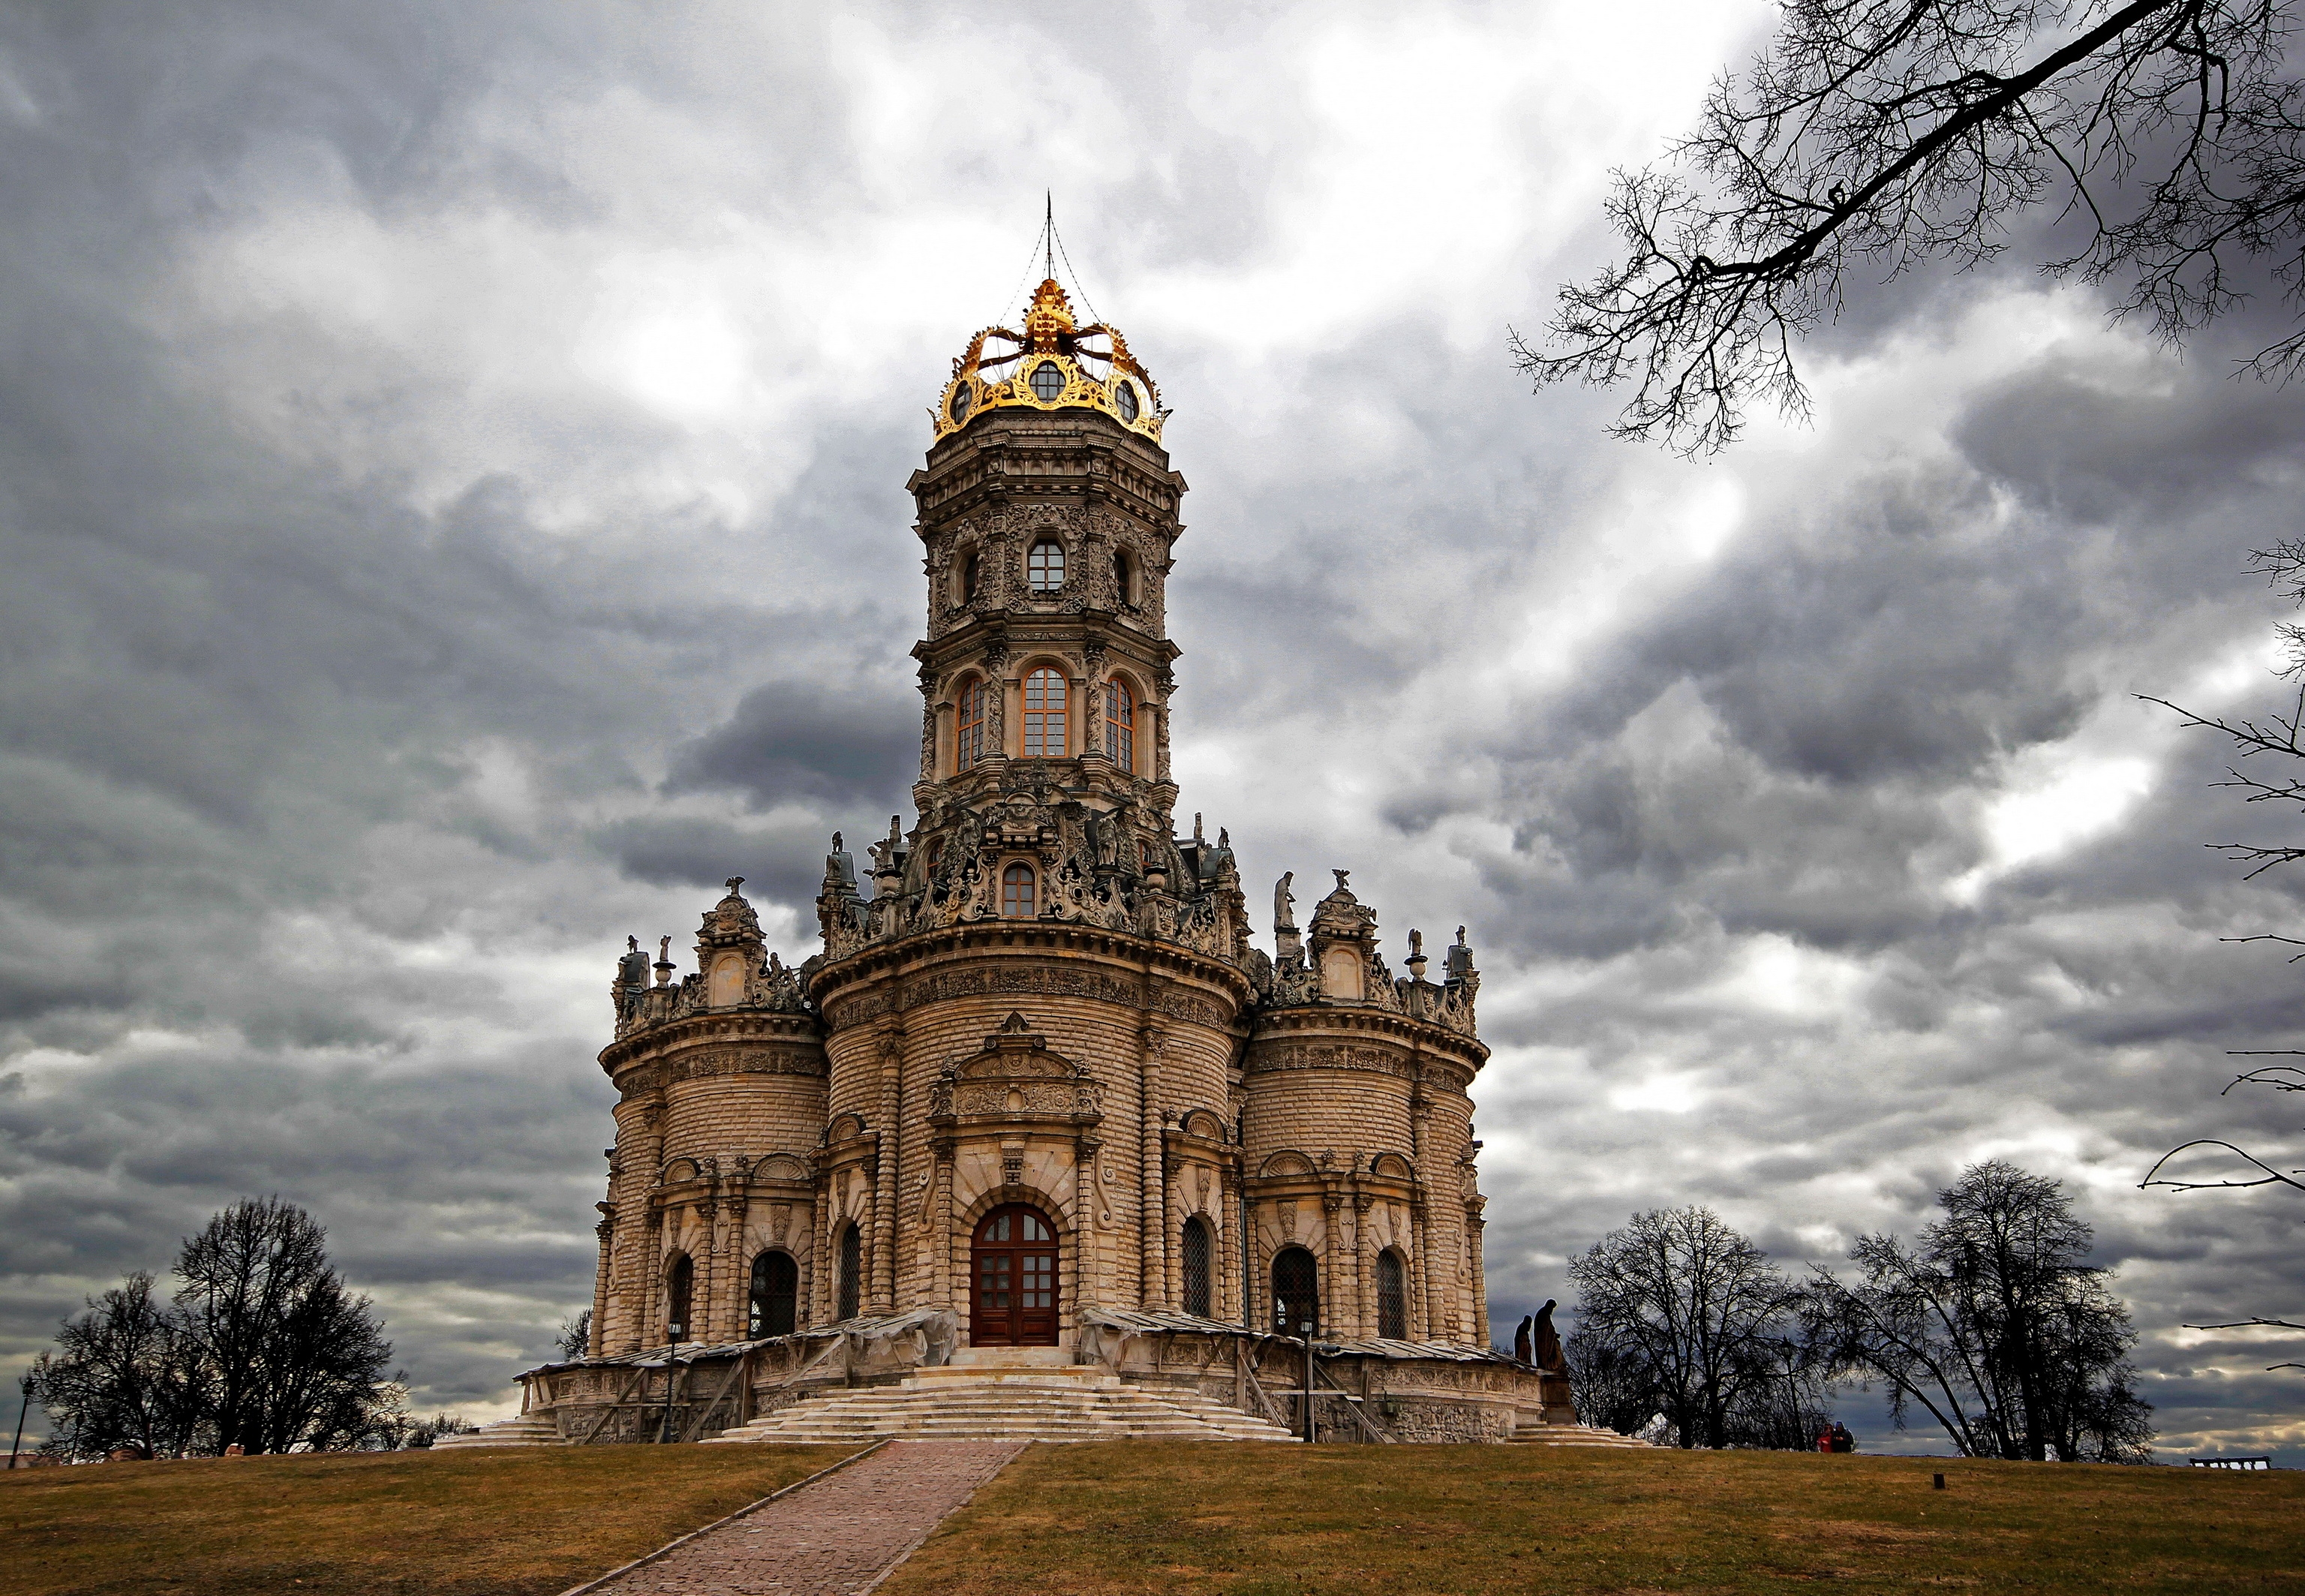 Wallpaper for mobile devices russia, clouds, church, podolsk